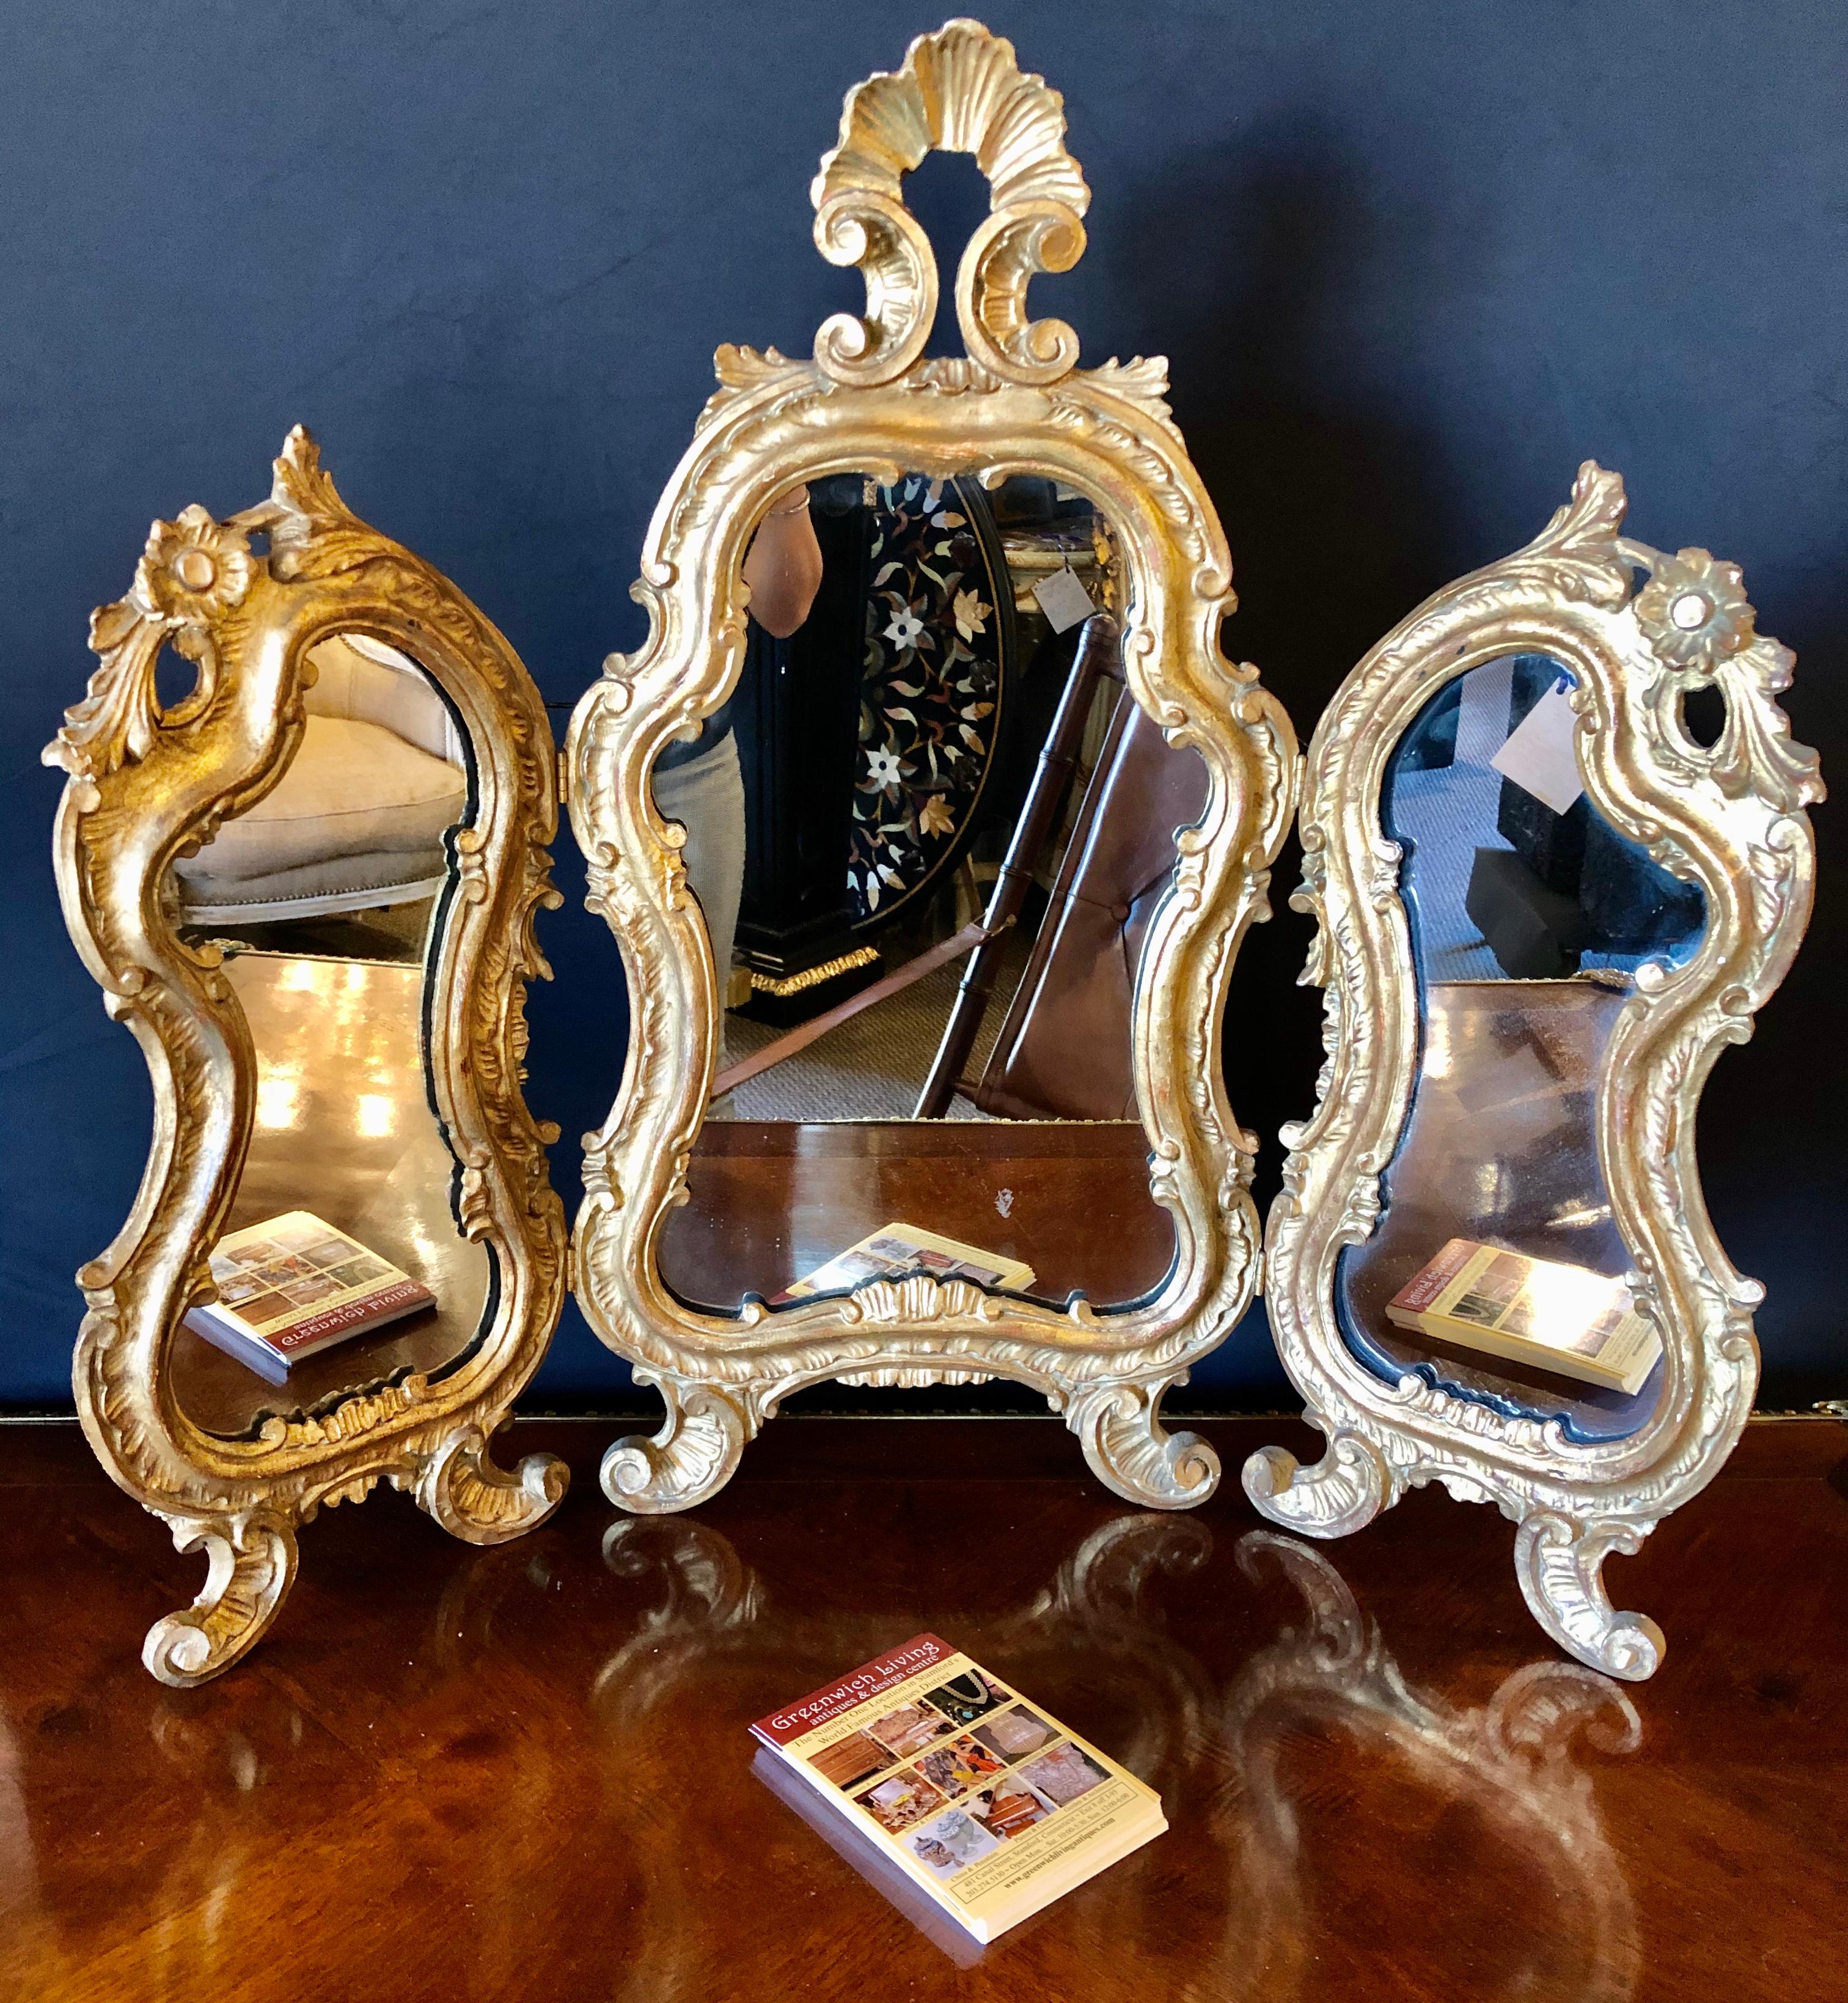 Hollywood Regency three fold table mirror in gold leaf. Sweet tri fold table or vanity mirror in a had leaf gold finish with a carved shell form and rose decorated frame. This mirror can also be hung on the wall flat or three dimensional.


IXXX.